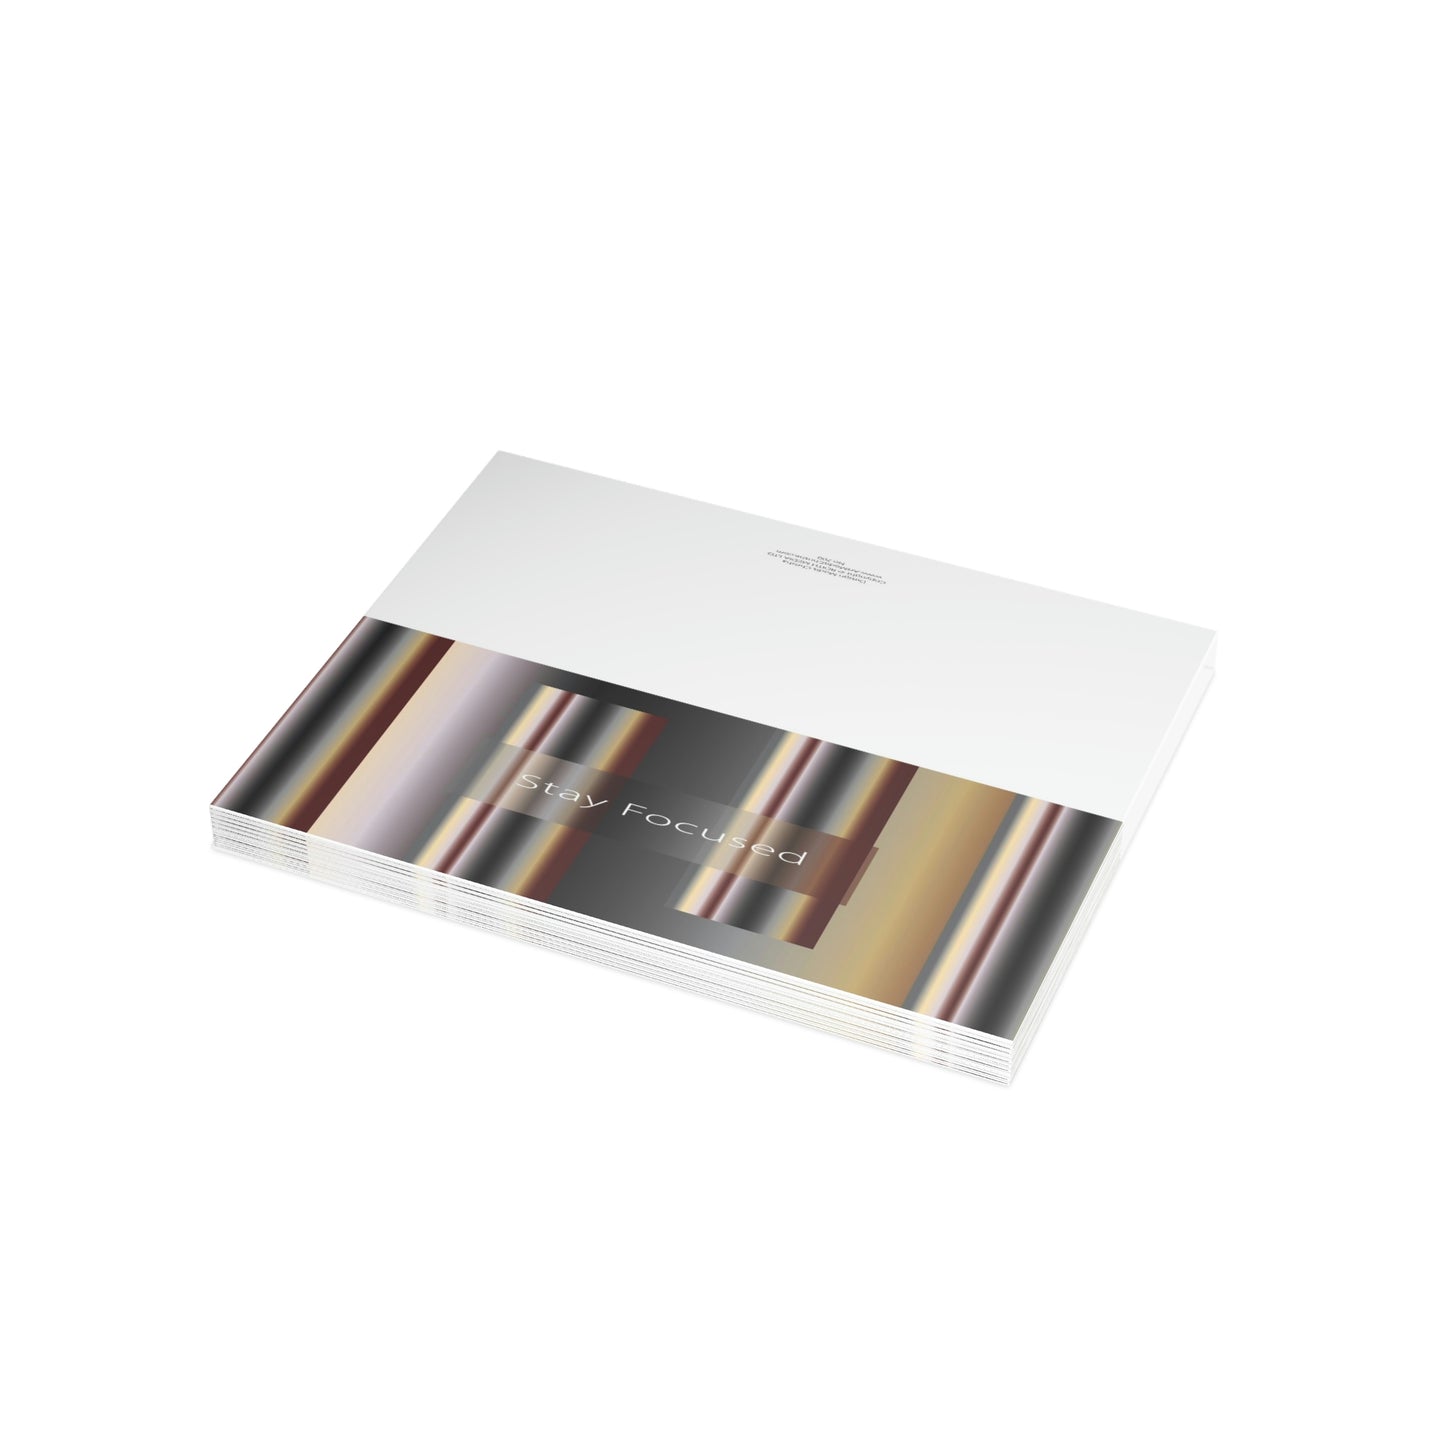 Folded Greeting Cards Horizontal (1, 10, 30, and 50pcs) Stay Focused - Design No.700